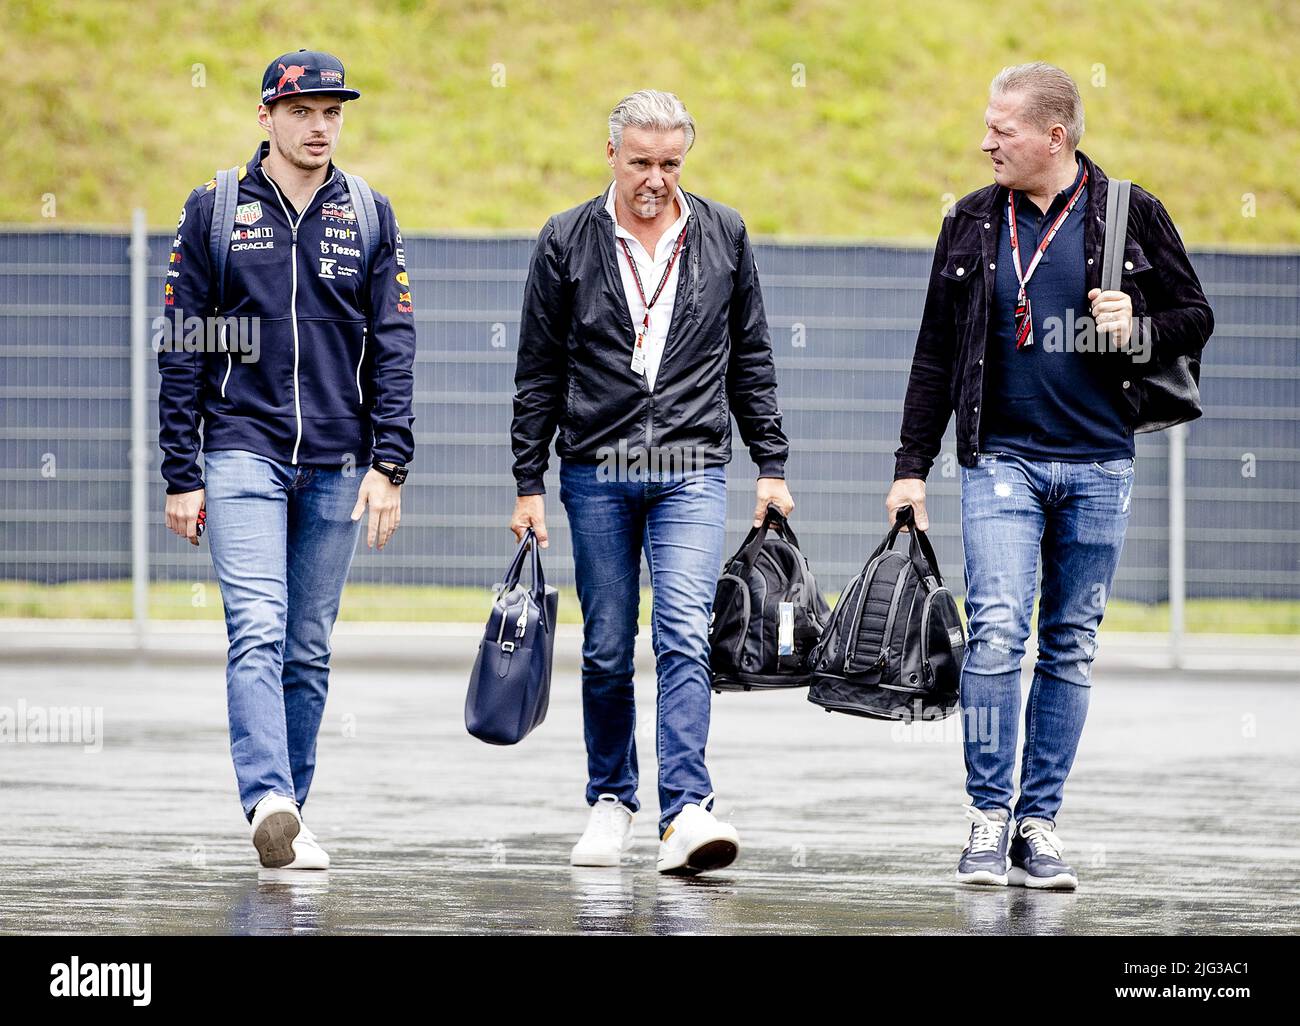 Spielberg, Austria. 7th July, 2022. 2022-07-07 13:31:43 SPIELBERG - Max Verstappen (Red Bull Racing), manager Raymond Vermeulen and father Jos Verstappen (from left to right) arrive at the Red Bull Ring race track in the run-up to the Austrian Grand Prix. ANP SEM VAN DER WAL netherlands out - belgium out Credit: ANP/Alamy Live News Credit: ANP/Alamy Live News Credit: ANP/Alamy Live News Stock Photo